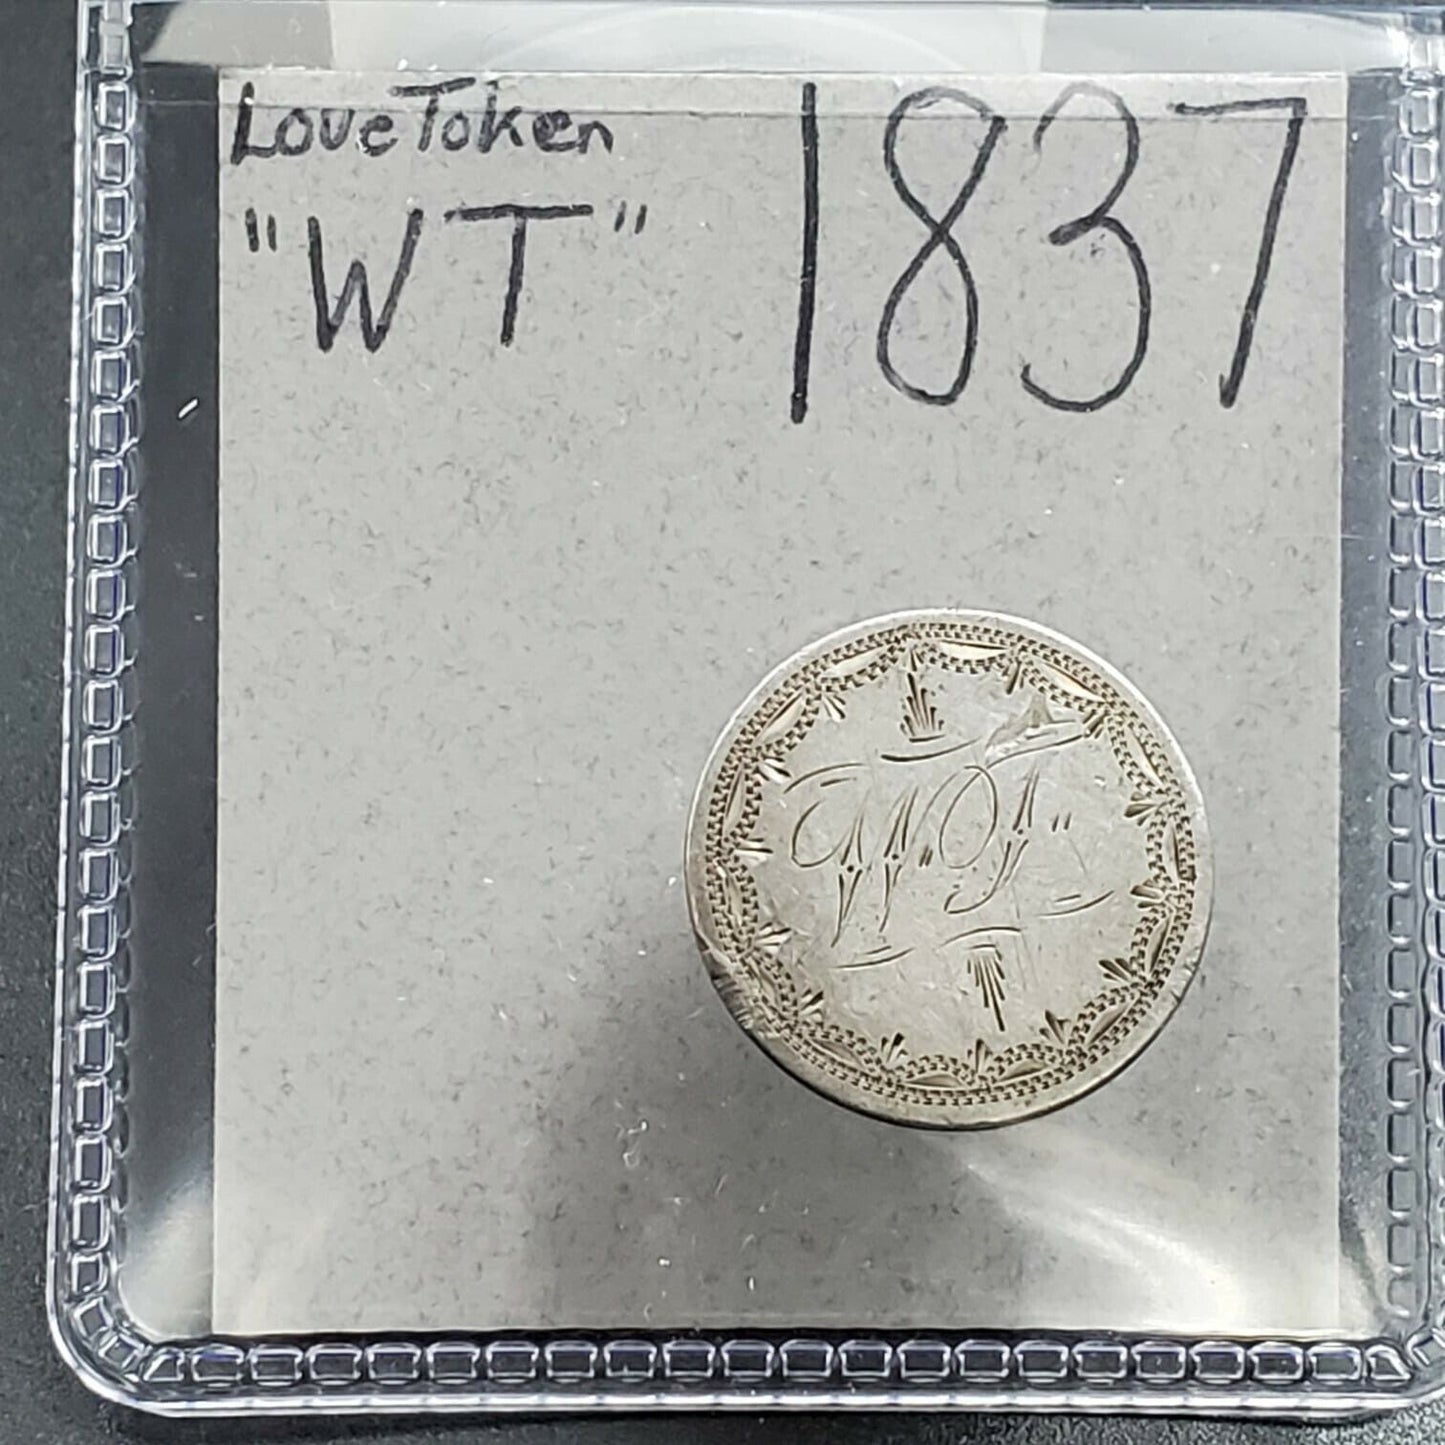 1837 Capped Bust Dime Engraved Love Token Pendant WT W.T Initials Logo